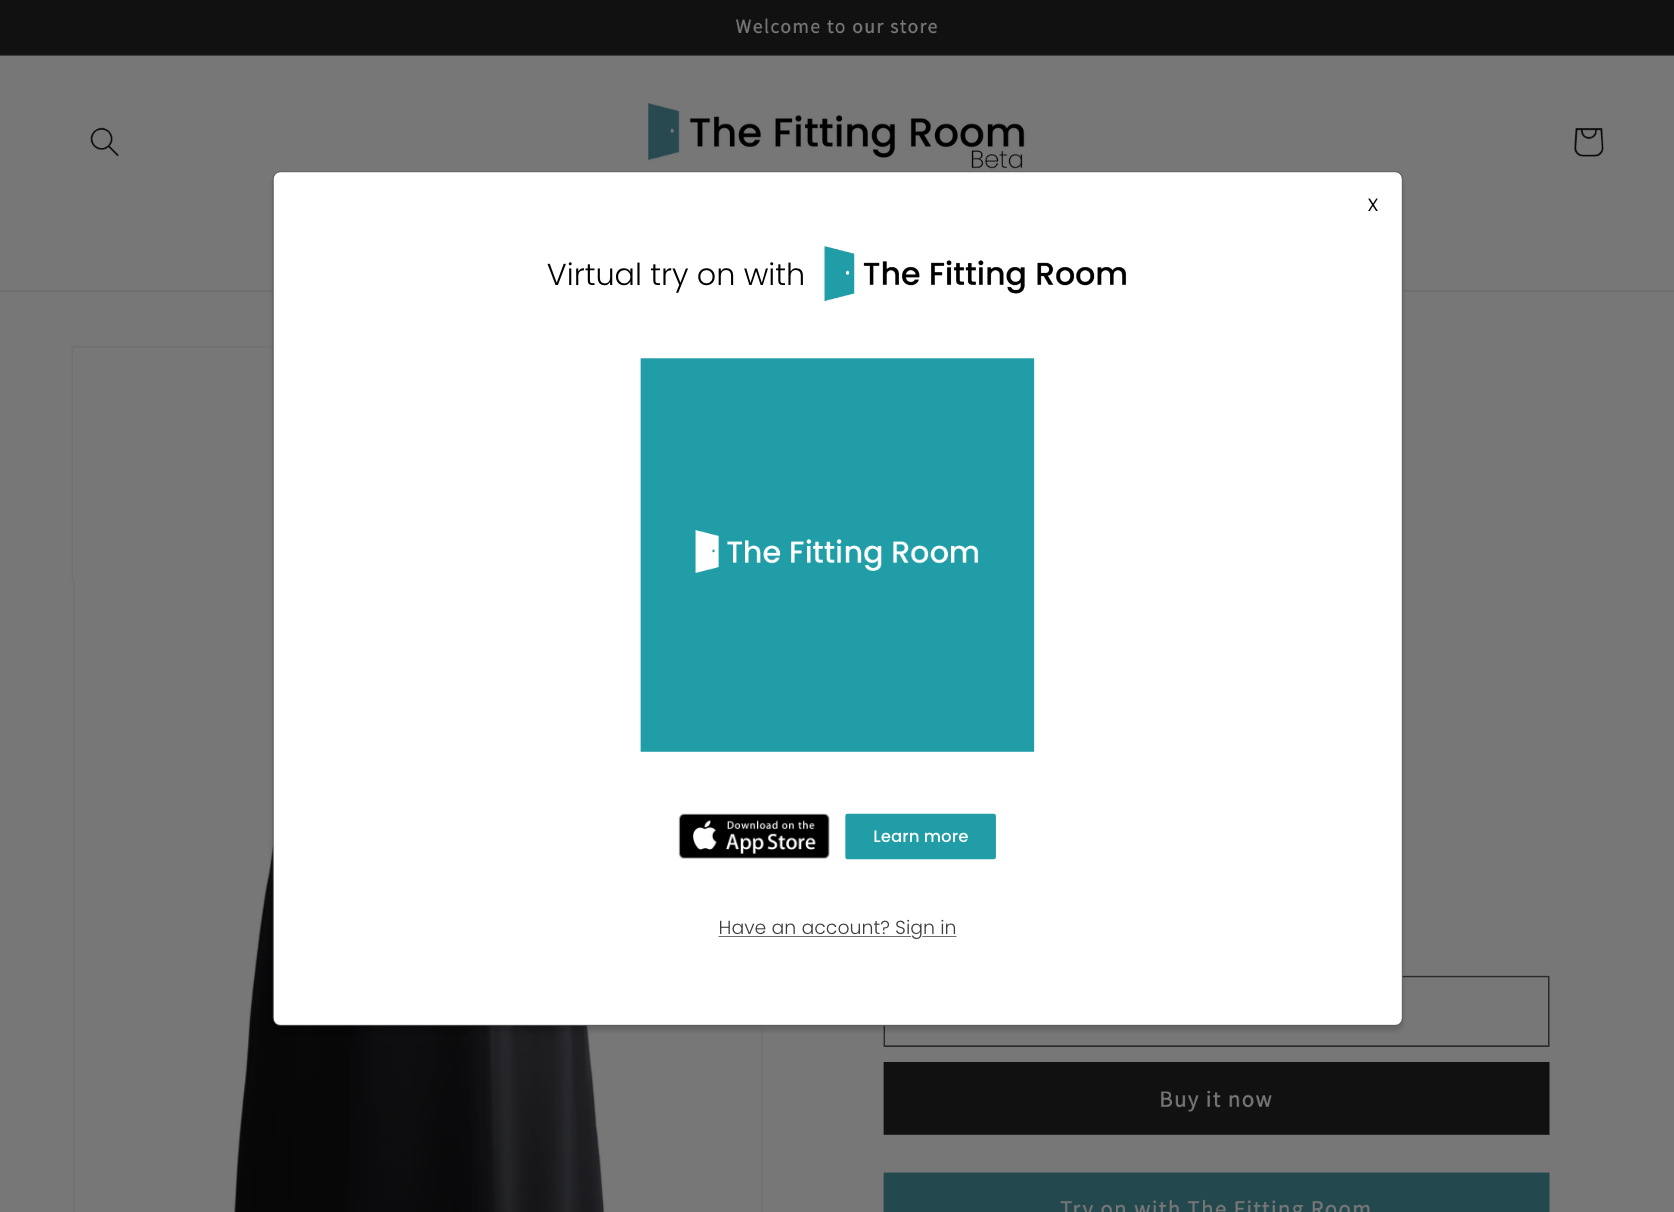 allen & gerritsen launches mobile apps for the fitting room